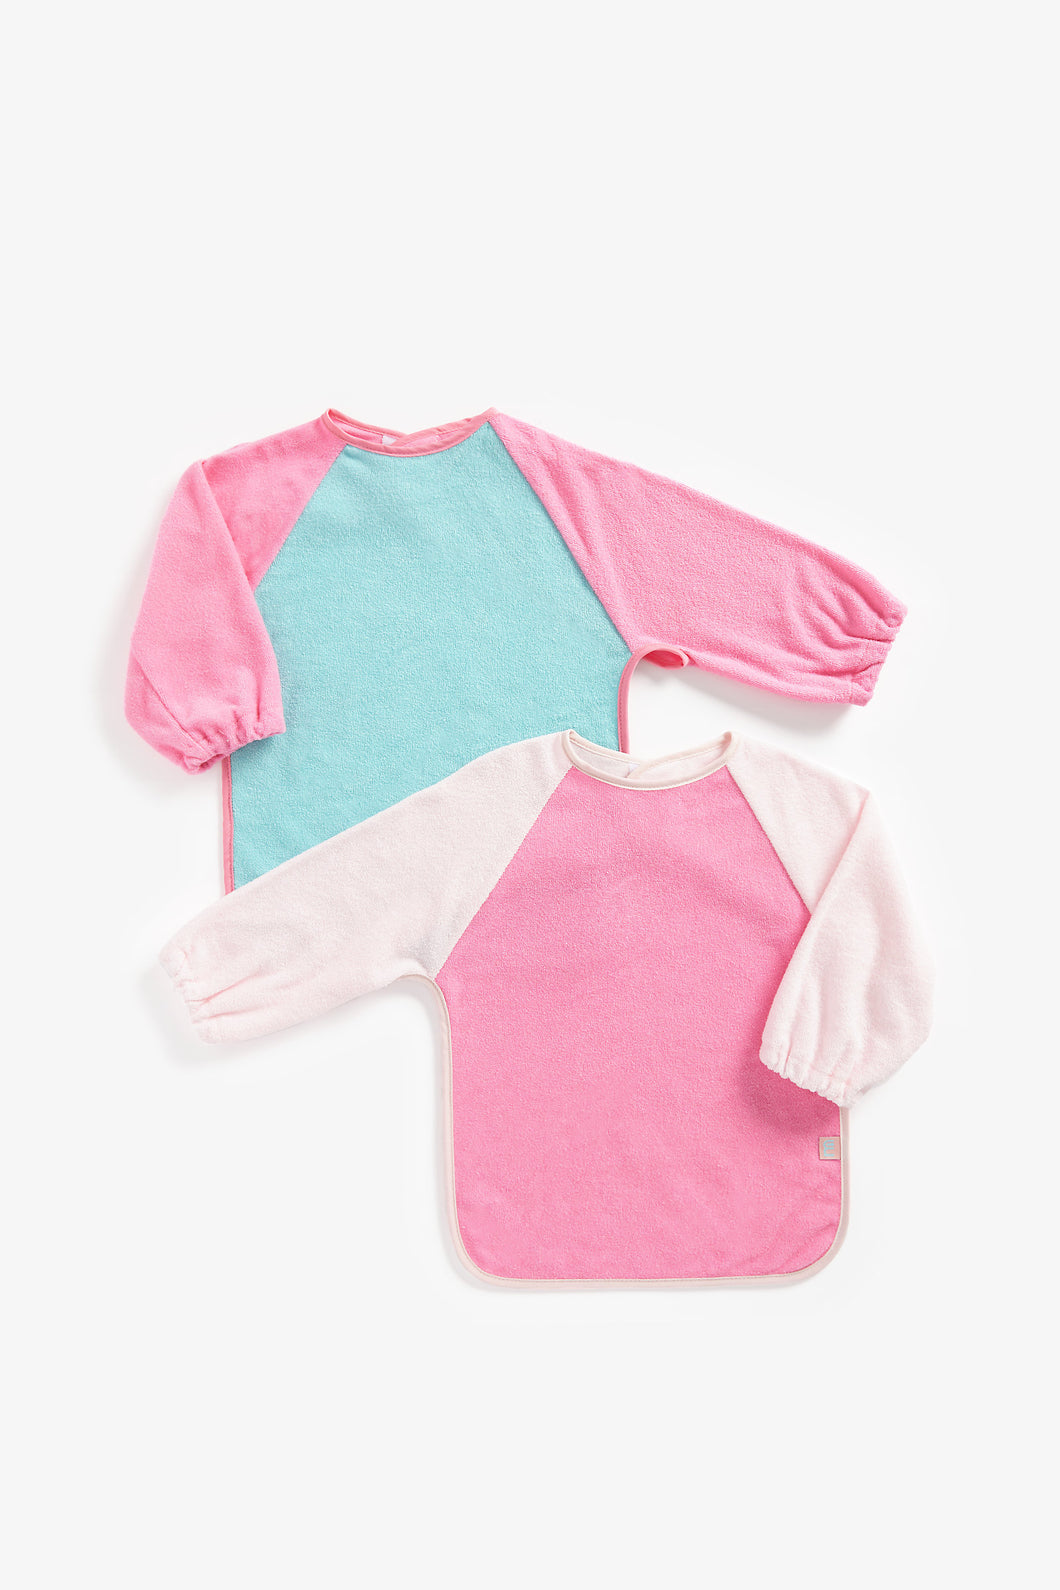 Mothercare Towelling Coverall Bibs Pink - 2 Pack